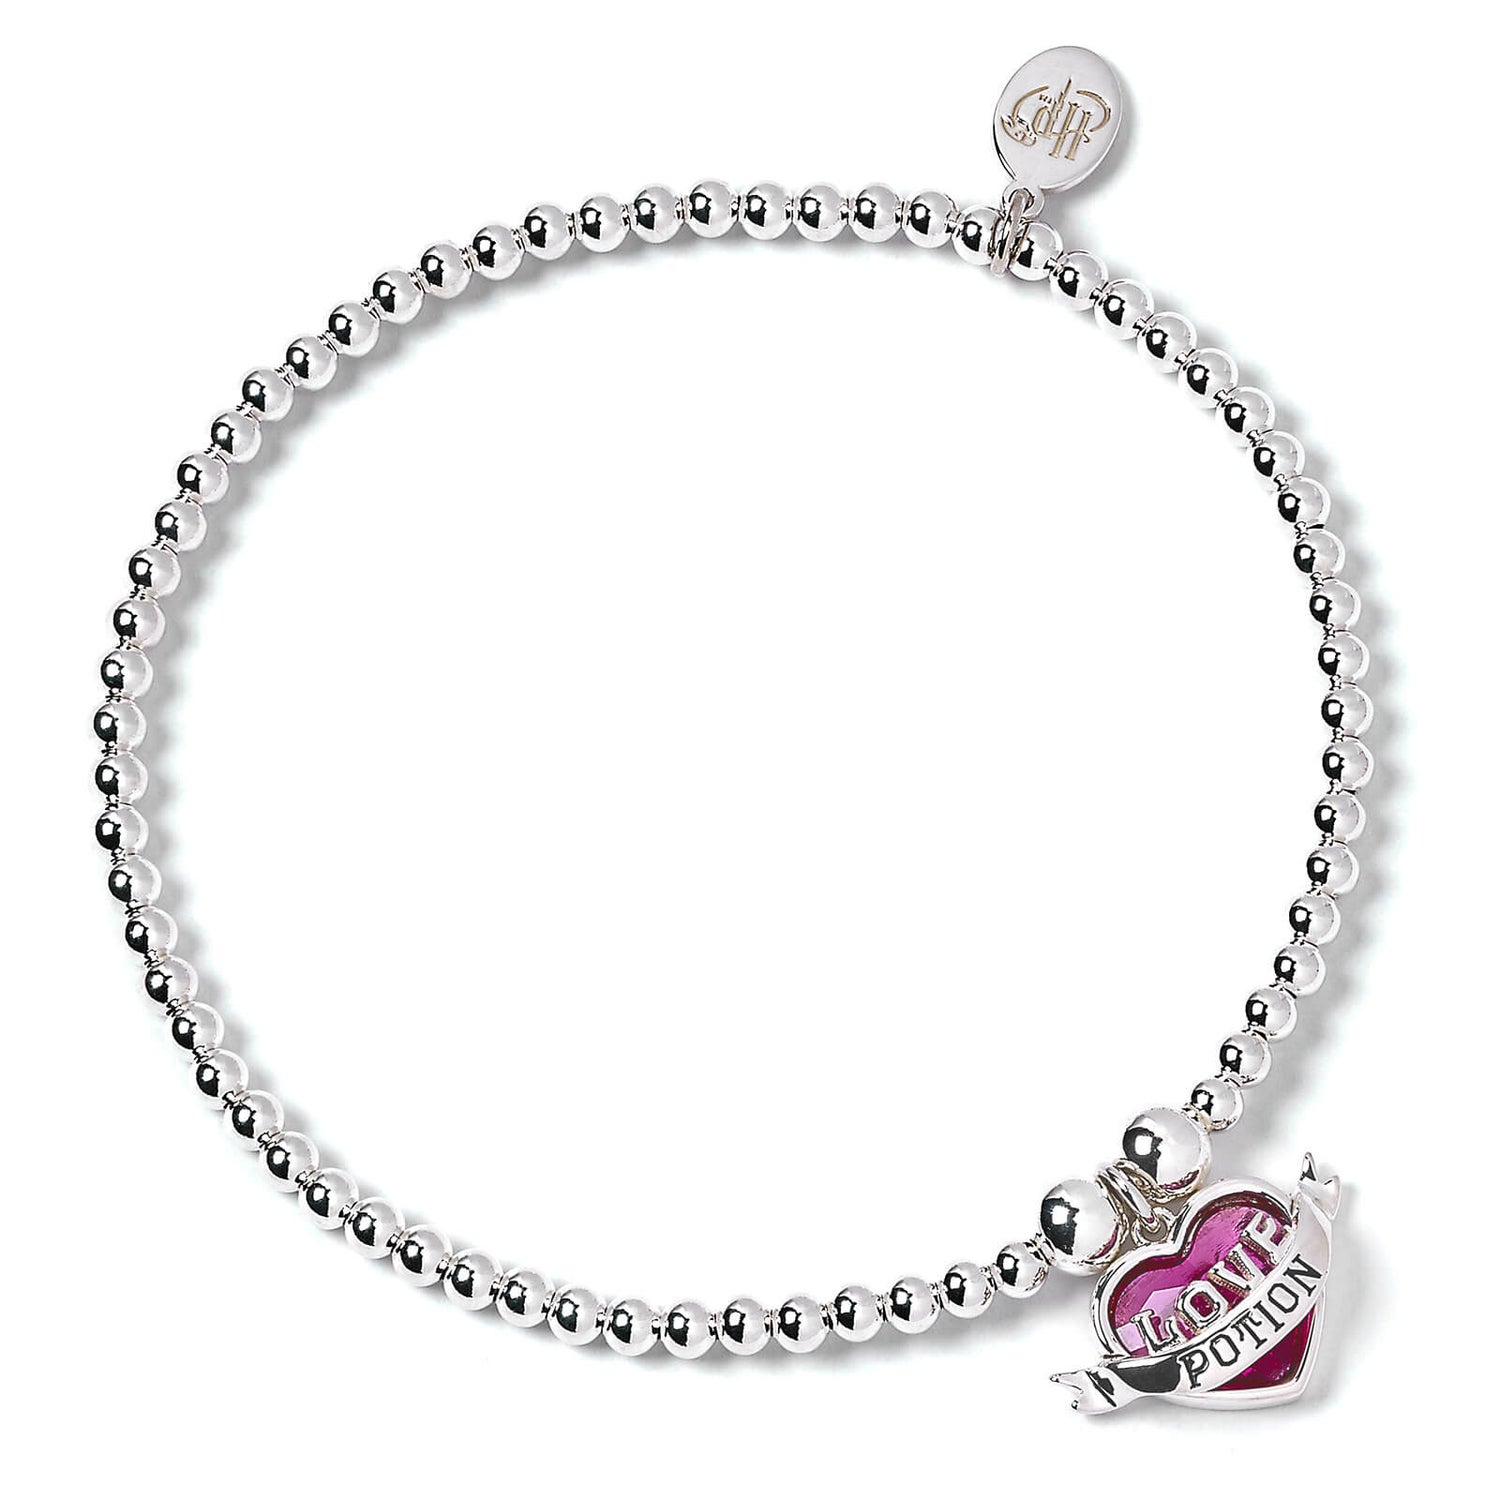 Harry Potter Ball Bead Bracelet with Love Potion Charm Embellished with Crystals - Sterling Silver